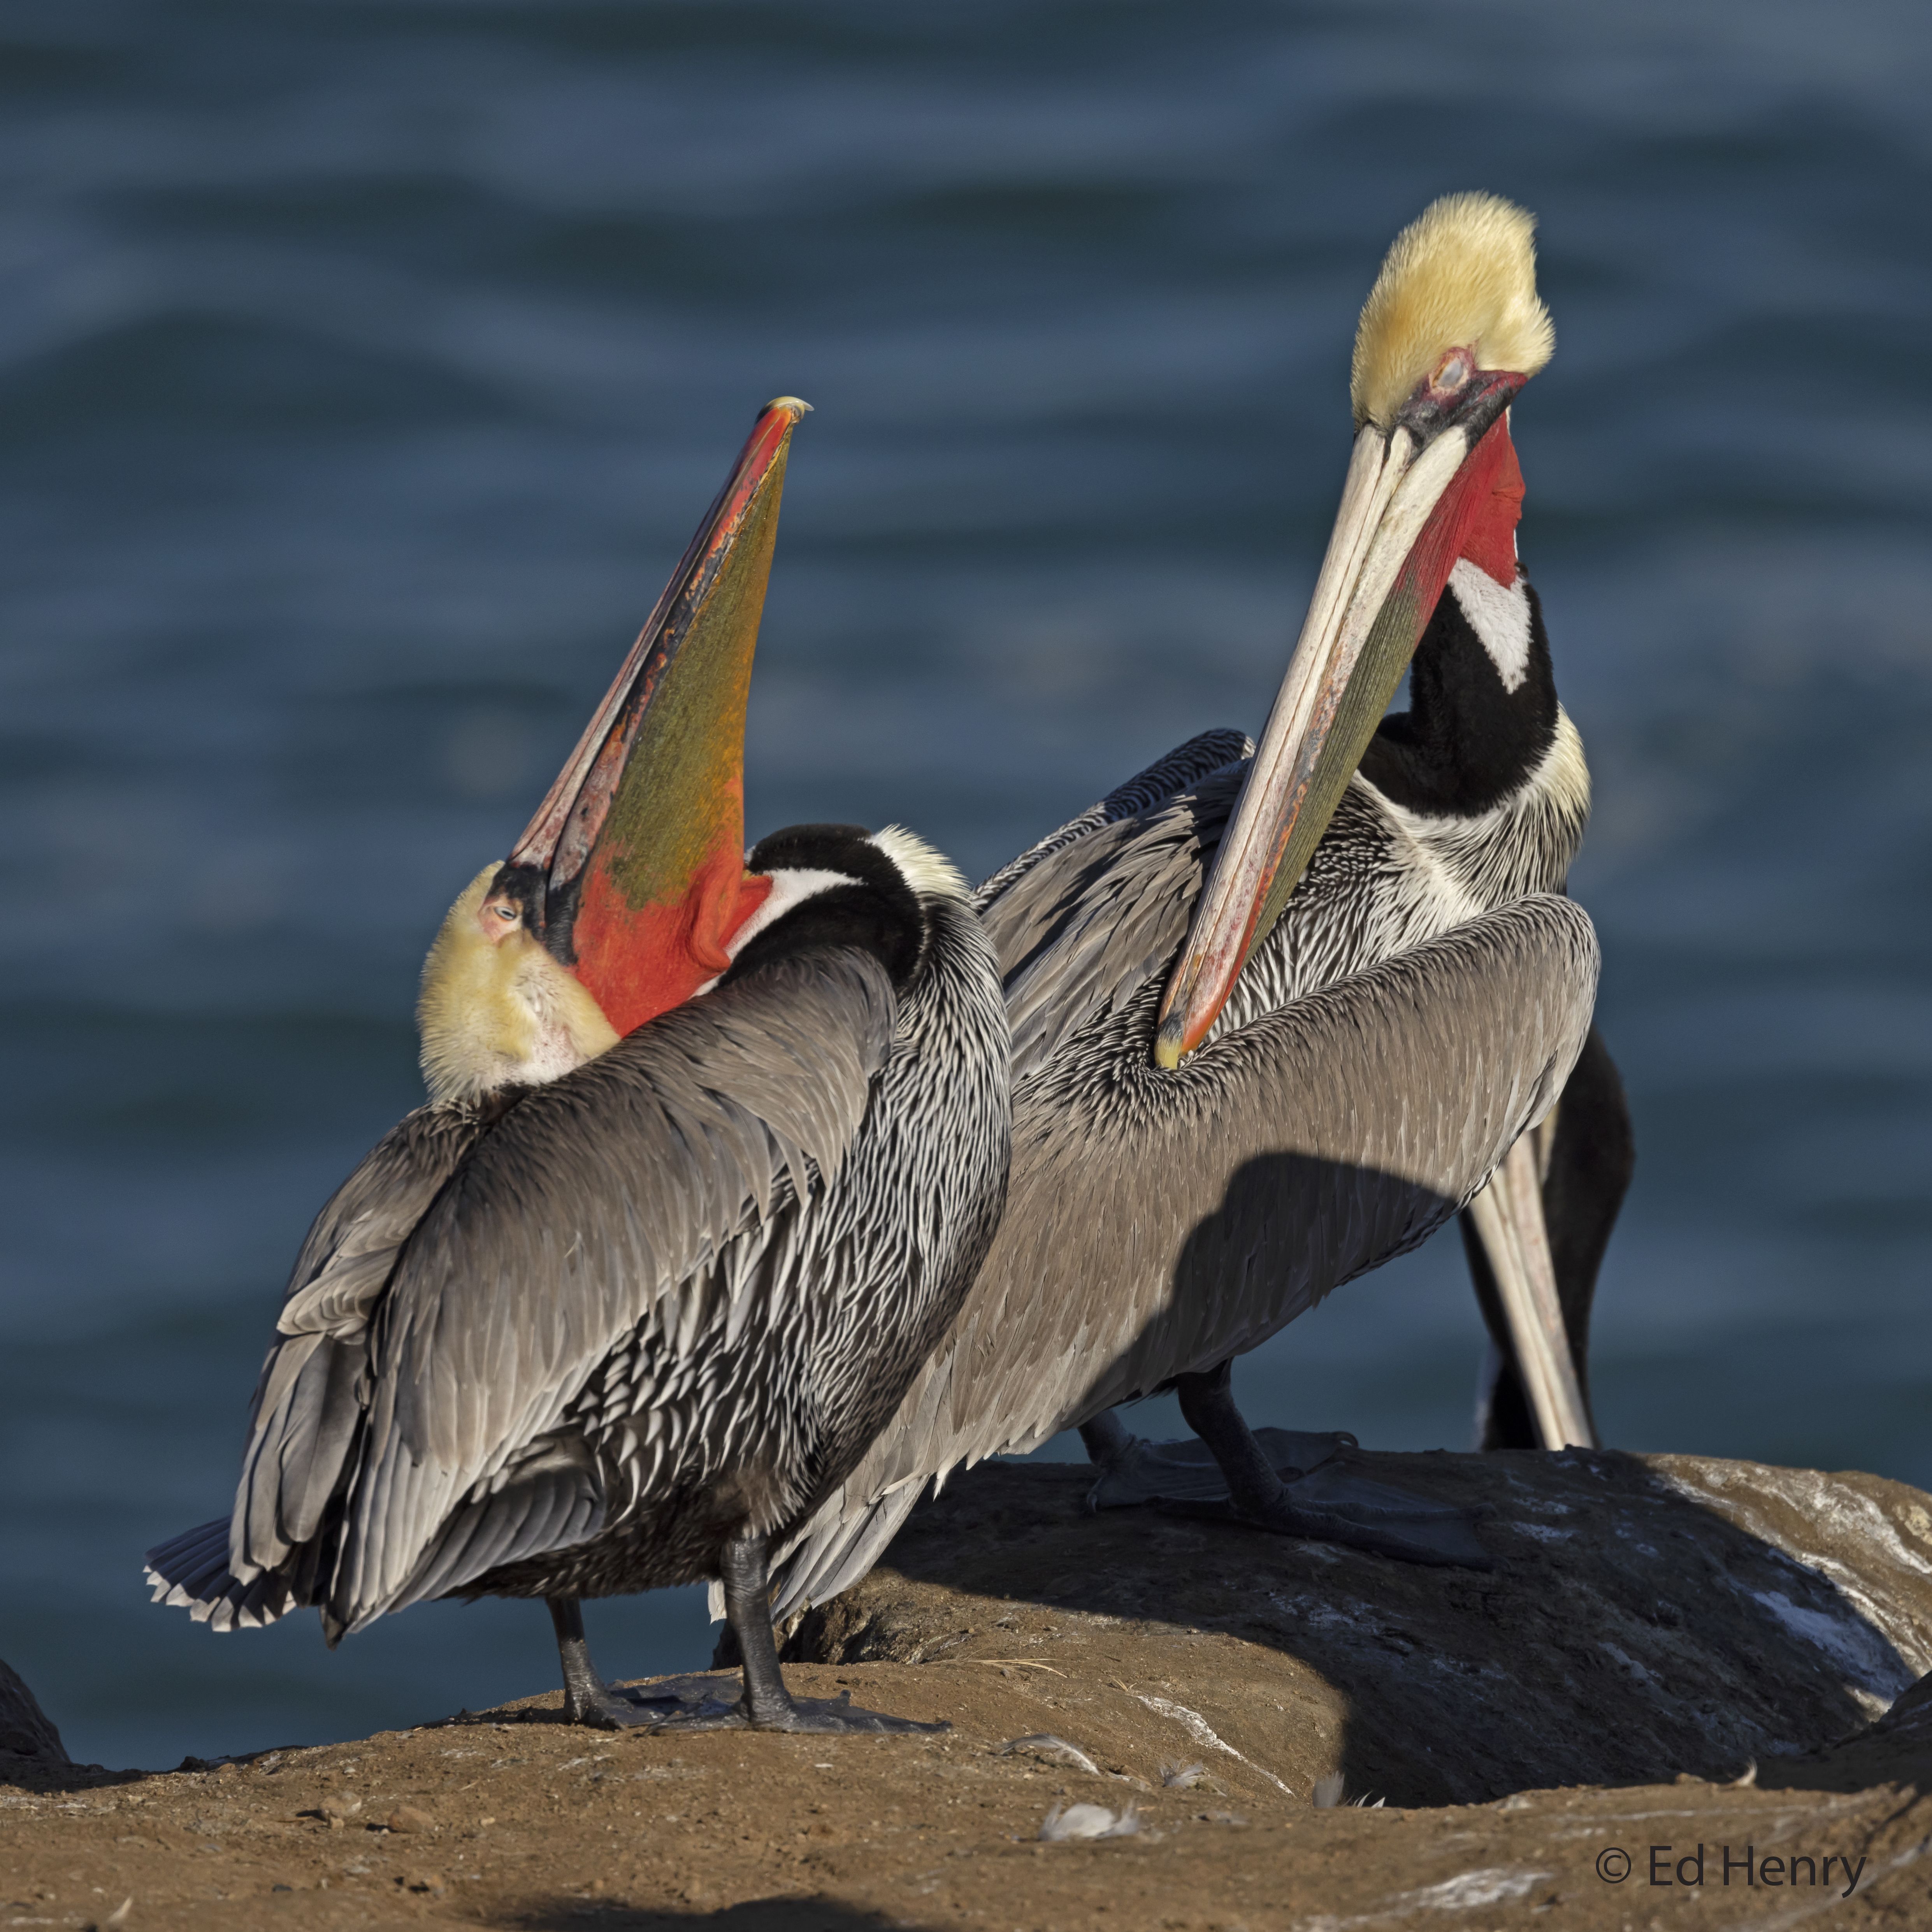 Alert: Brown Pelican Illness and Mortality Along the Southern CA Coastline